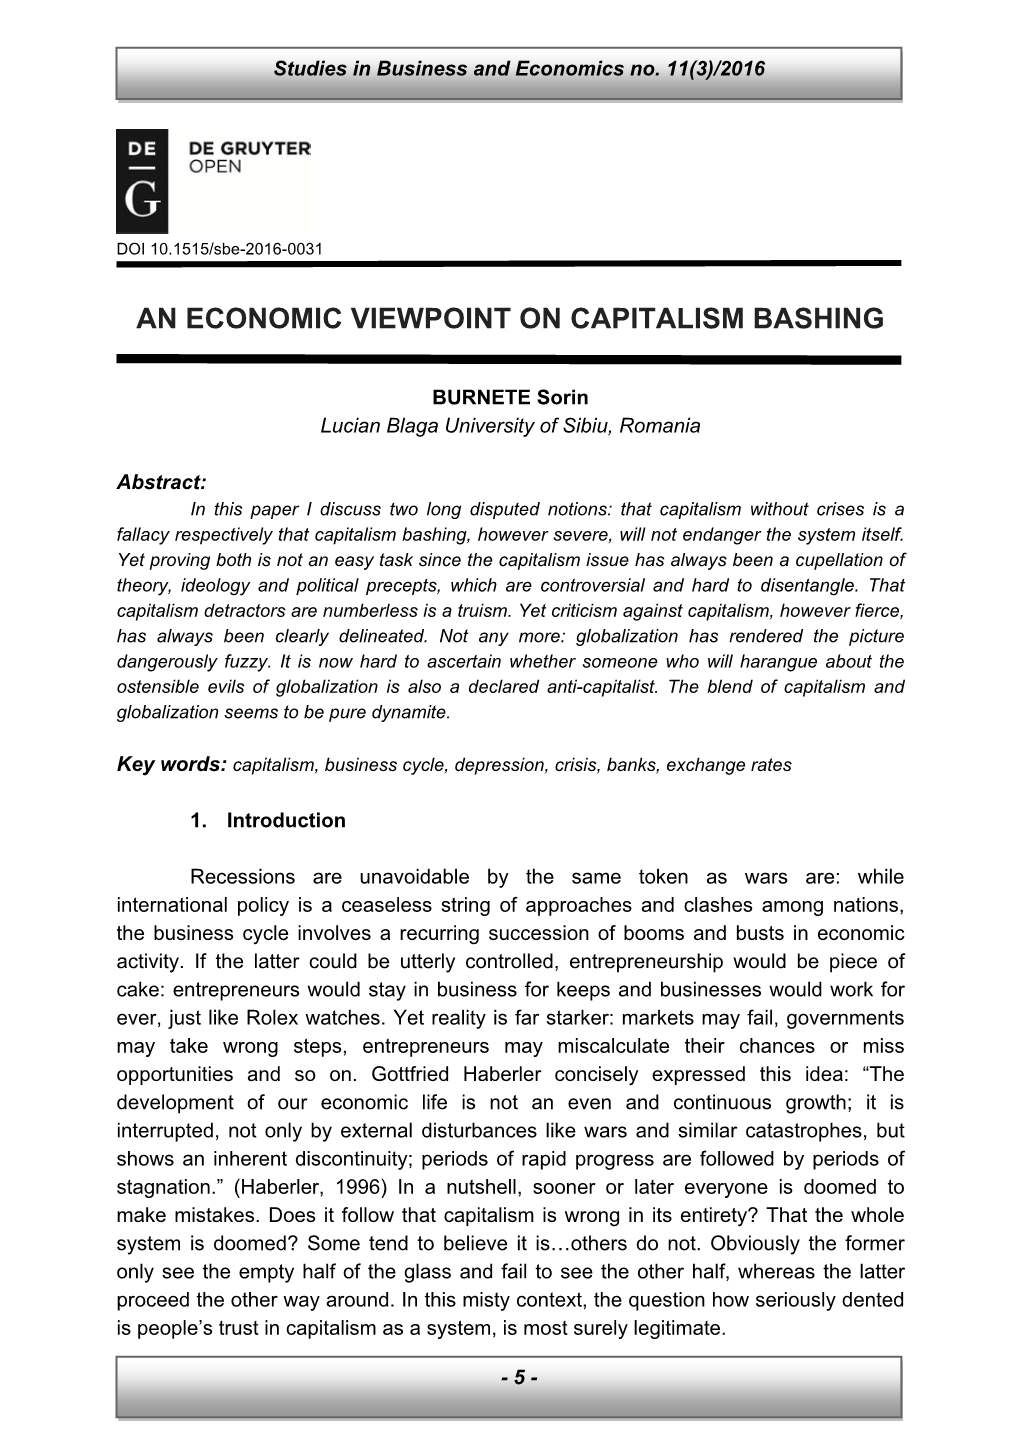 An Economic Viewpoint on Capitalism Bashing